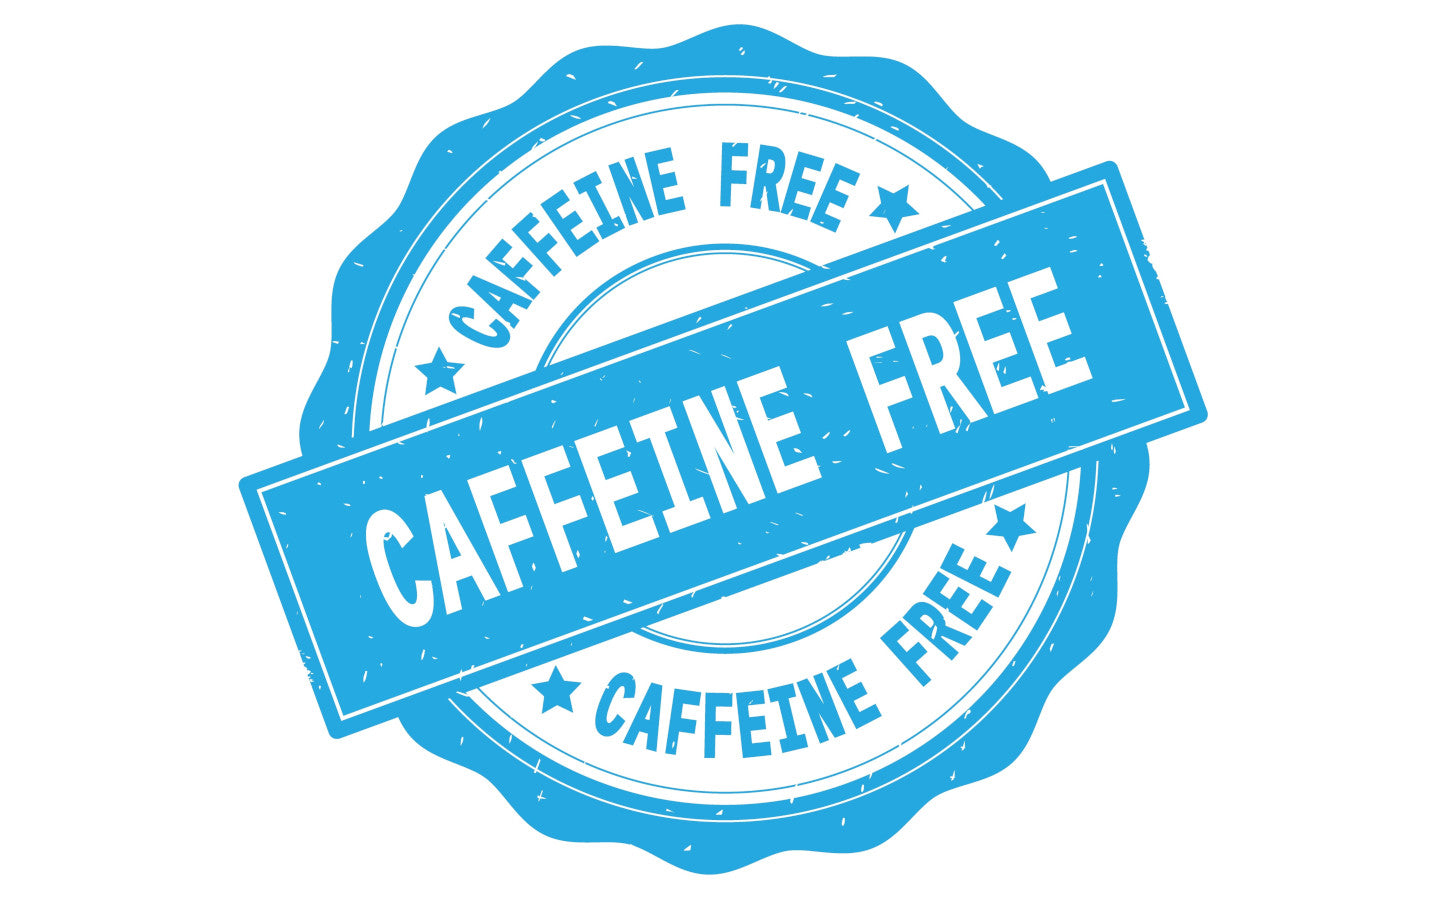 The benefits of caffeine-free pre-workouts